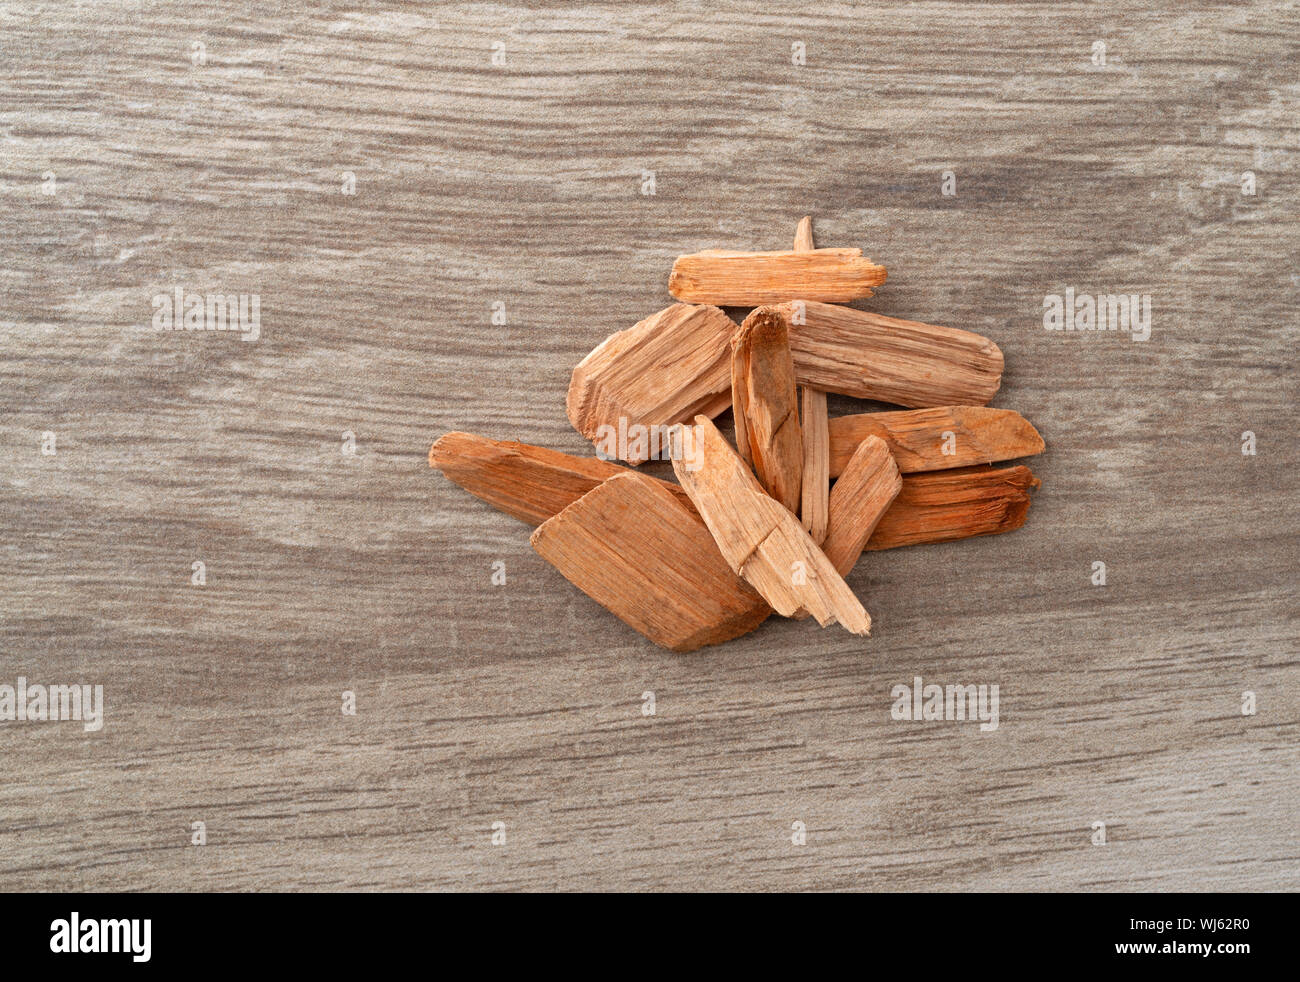 Small pile of alder wood smoking chips for barbecuing on a tile counter top. Stock Photo